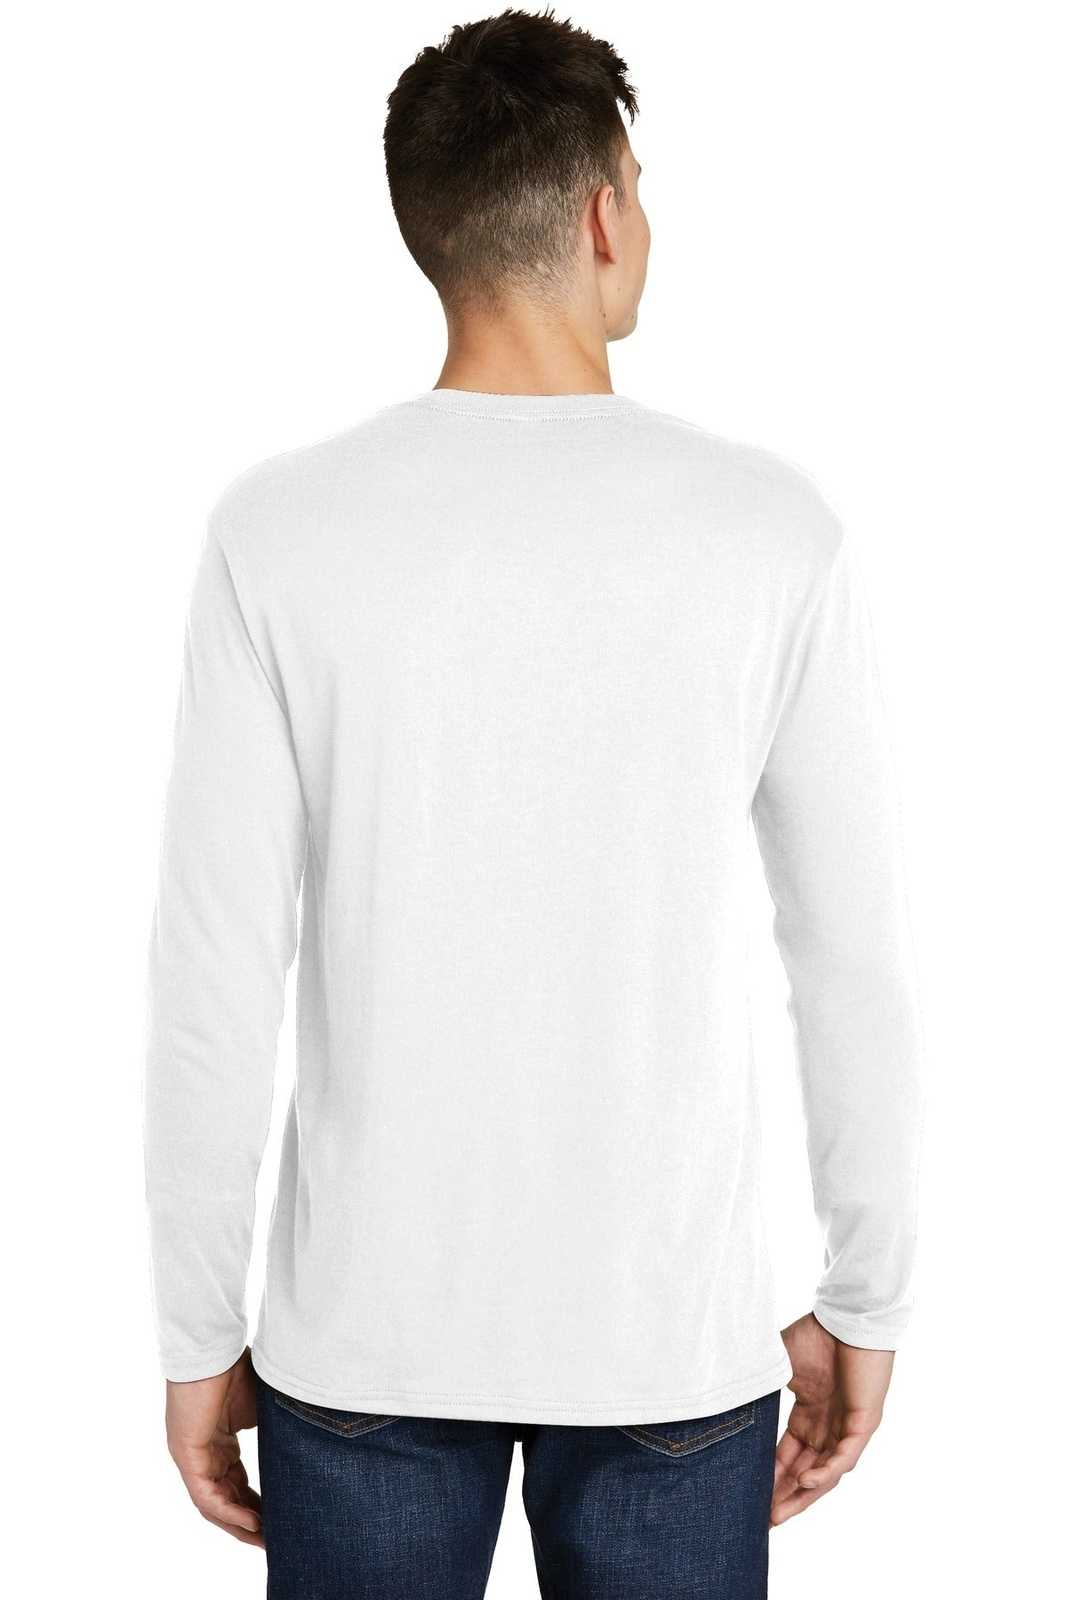 District DT6200 Very Important Tee Long Sleeve - White - HIT a Double - 1